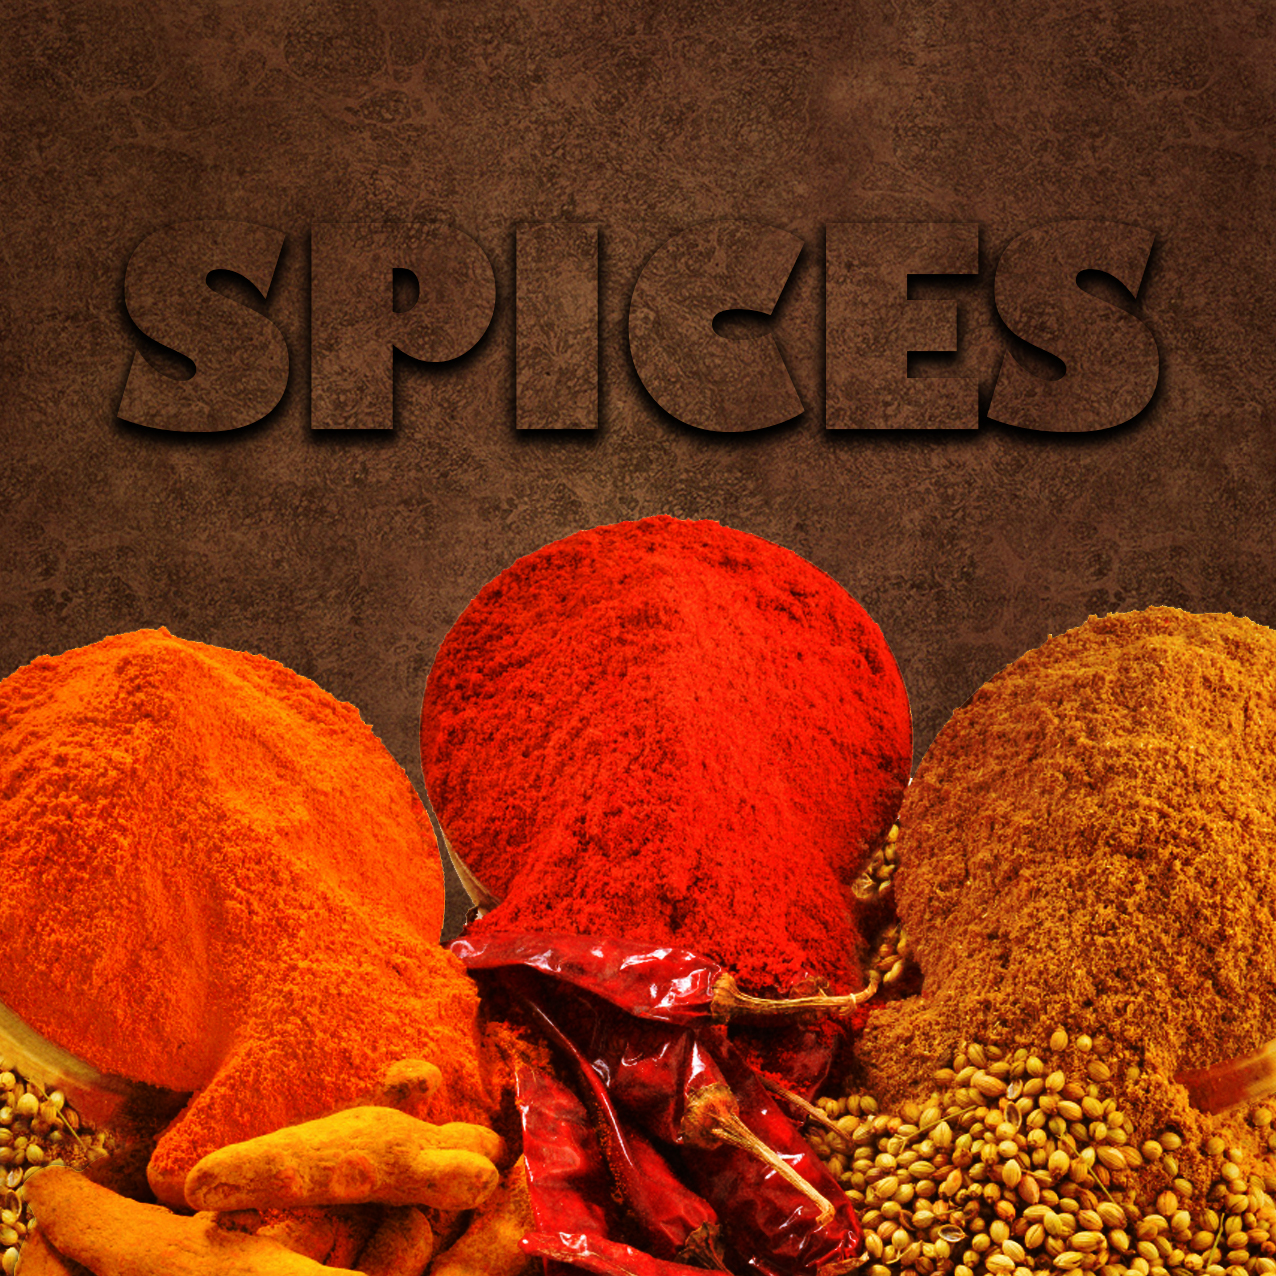 07. Spices